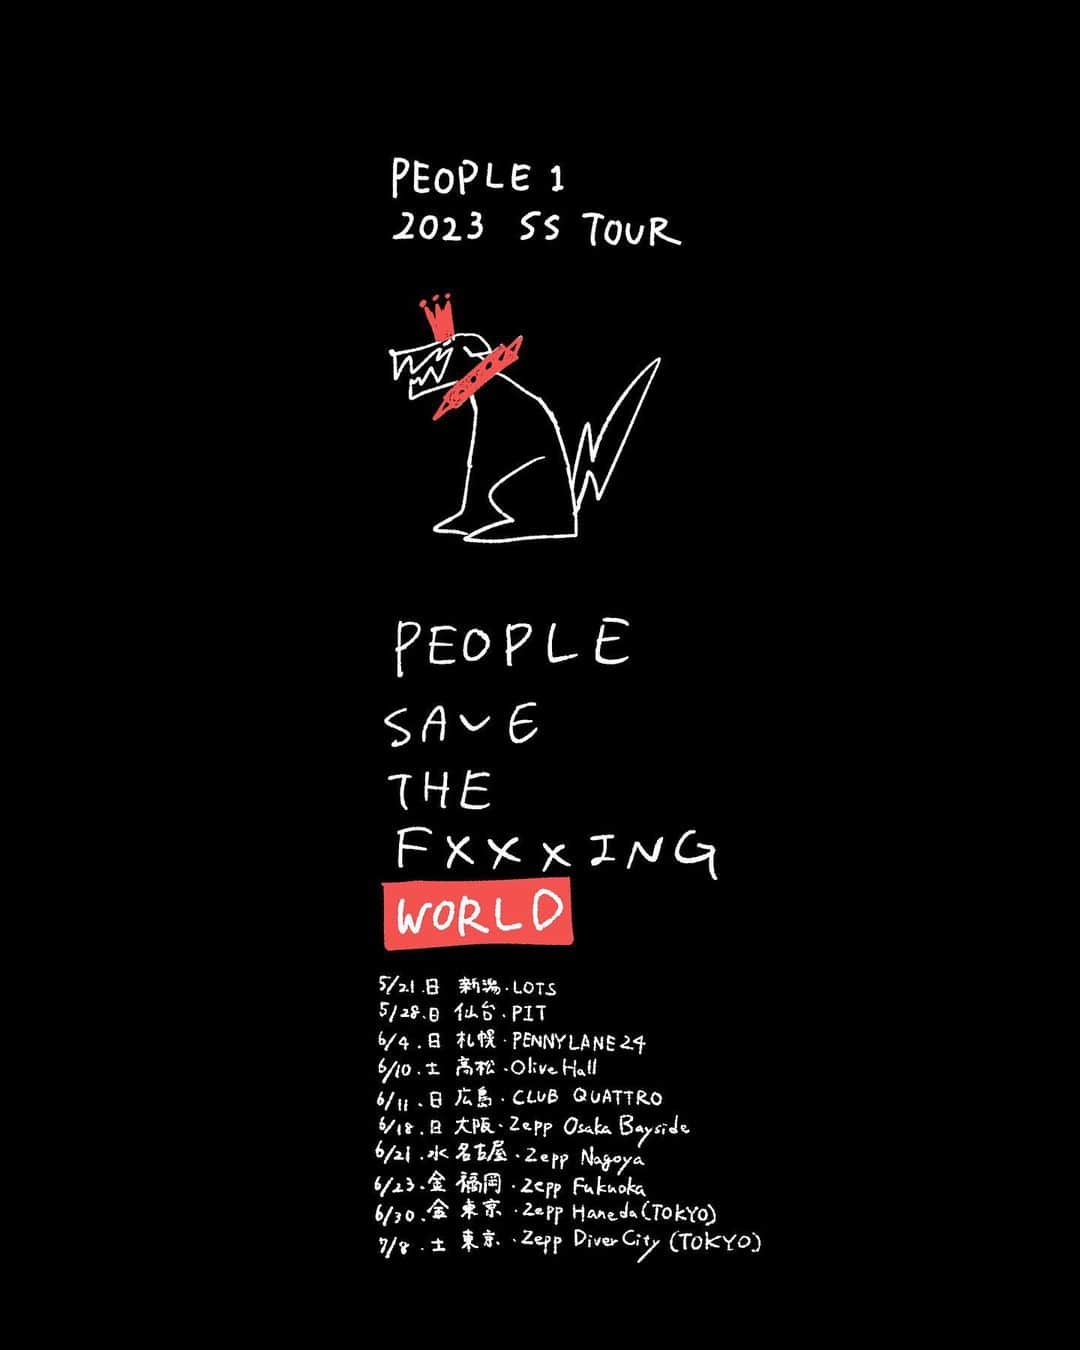 PEOPLE 1のインスタグラム：「4度目のワンマンツアー  PEOPLE 1 2023 SS TOUR “PEOPLE SAVE THE F×××ING WORLD”  開催決定です。  よしなに。  Designed by @coal_owl とDeu」